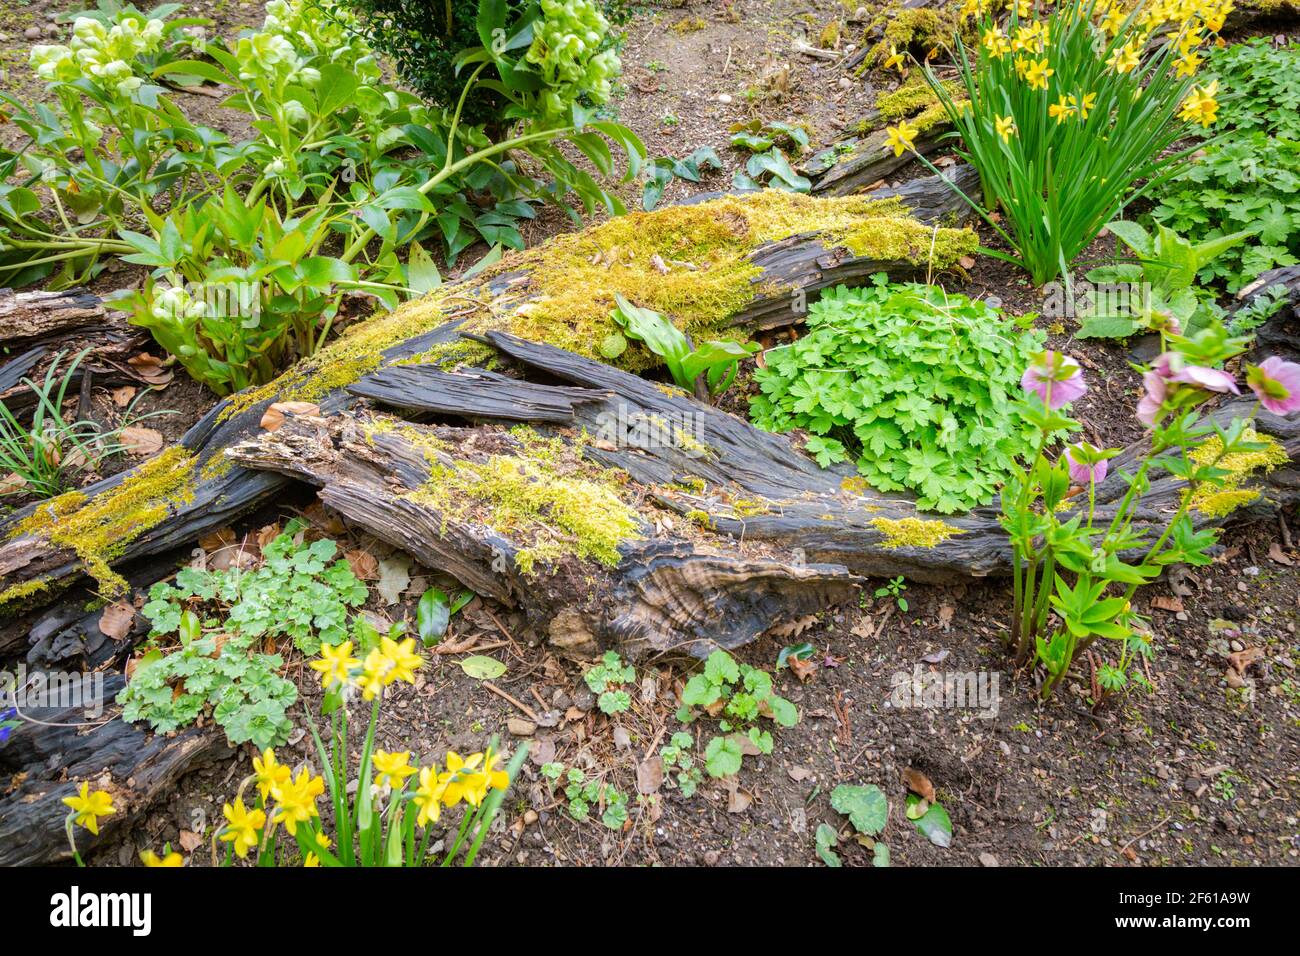 Old log in a garden bed to attract insects for biodiversity Stock Photo